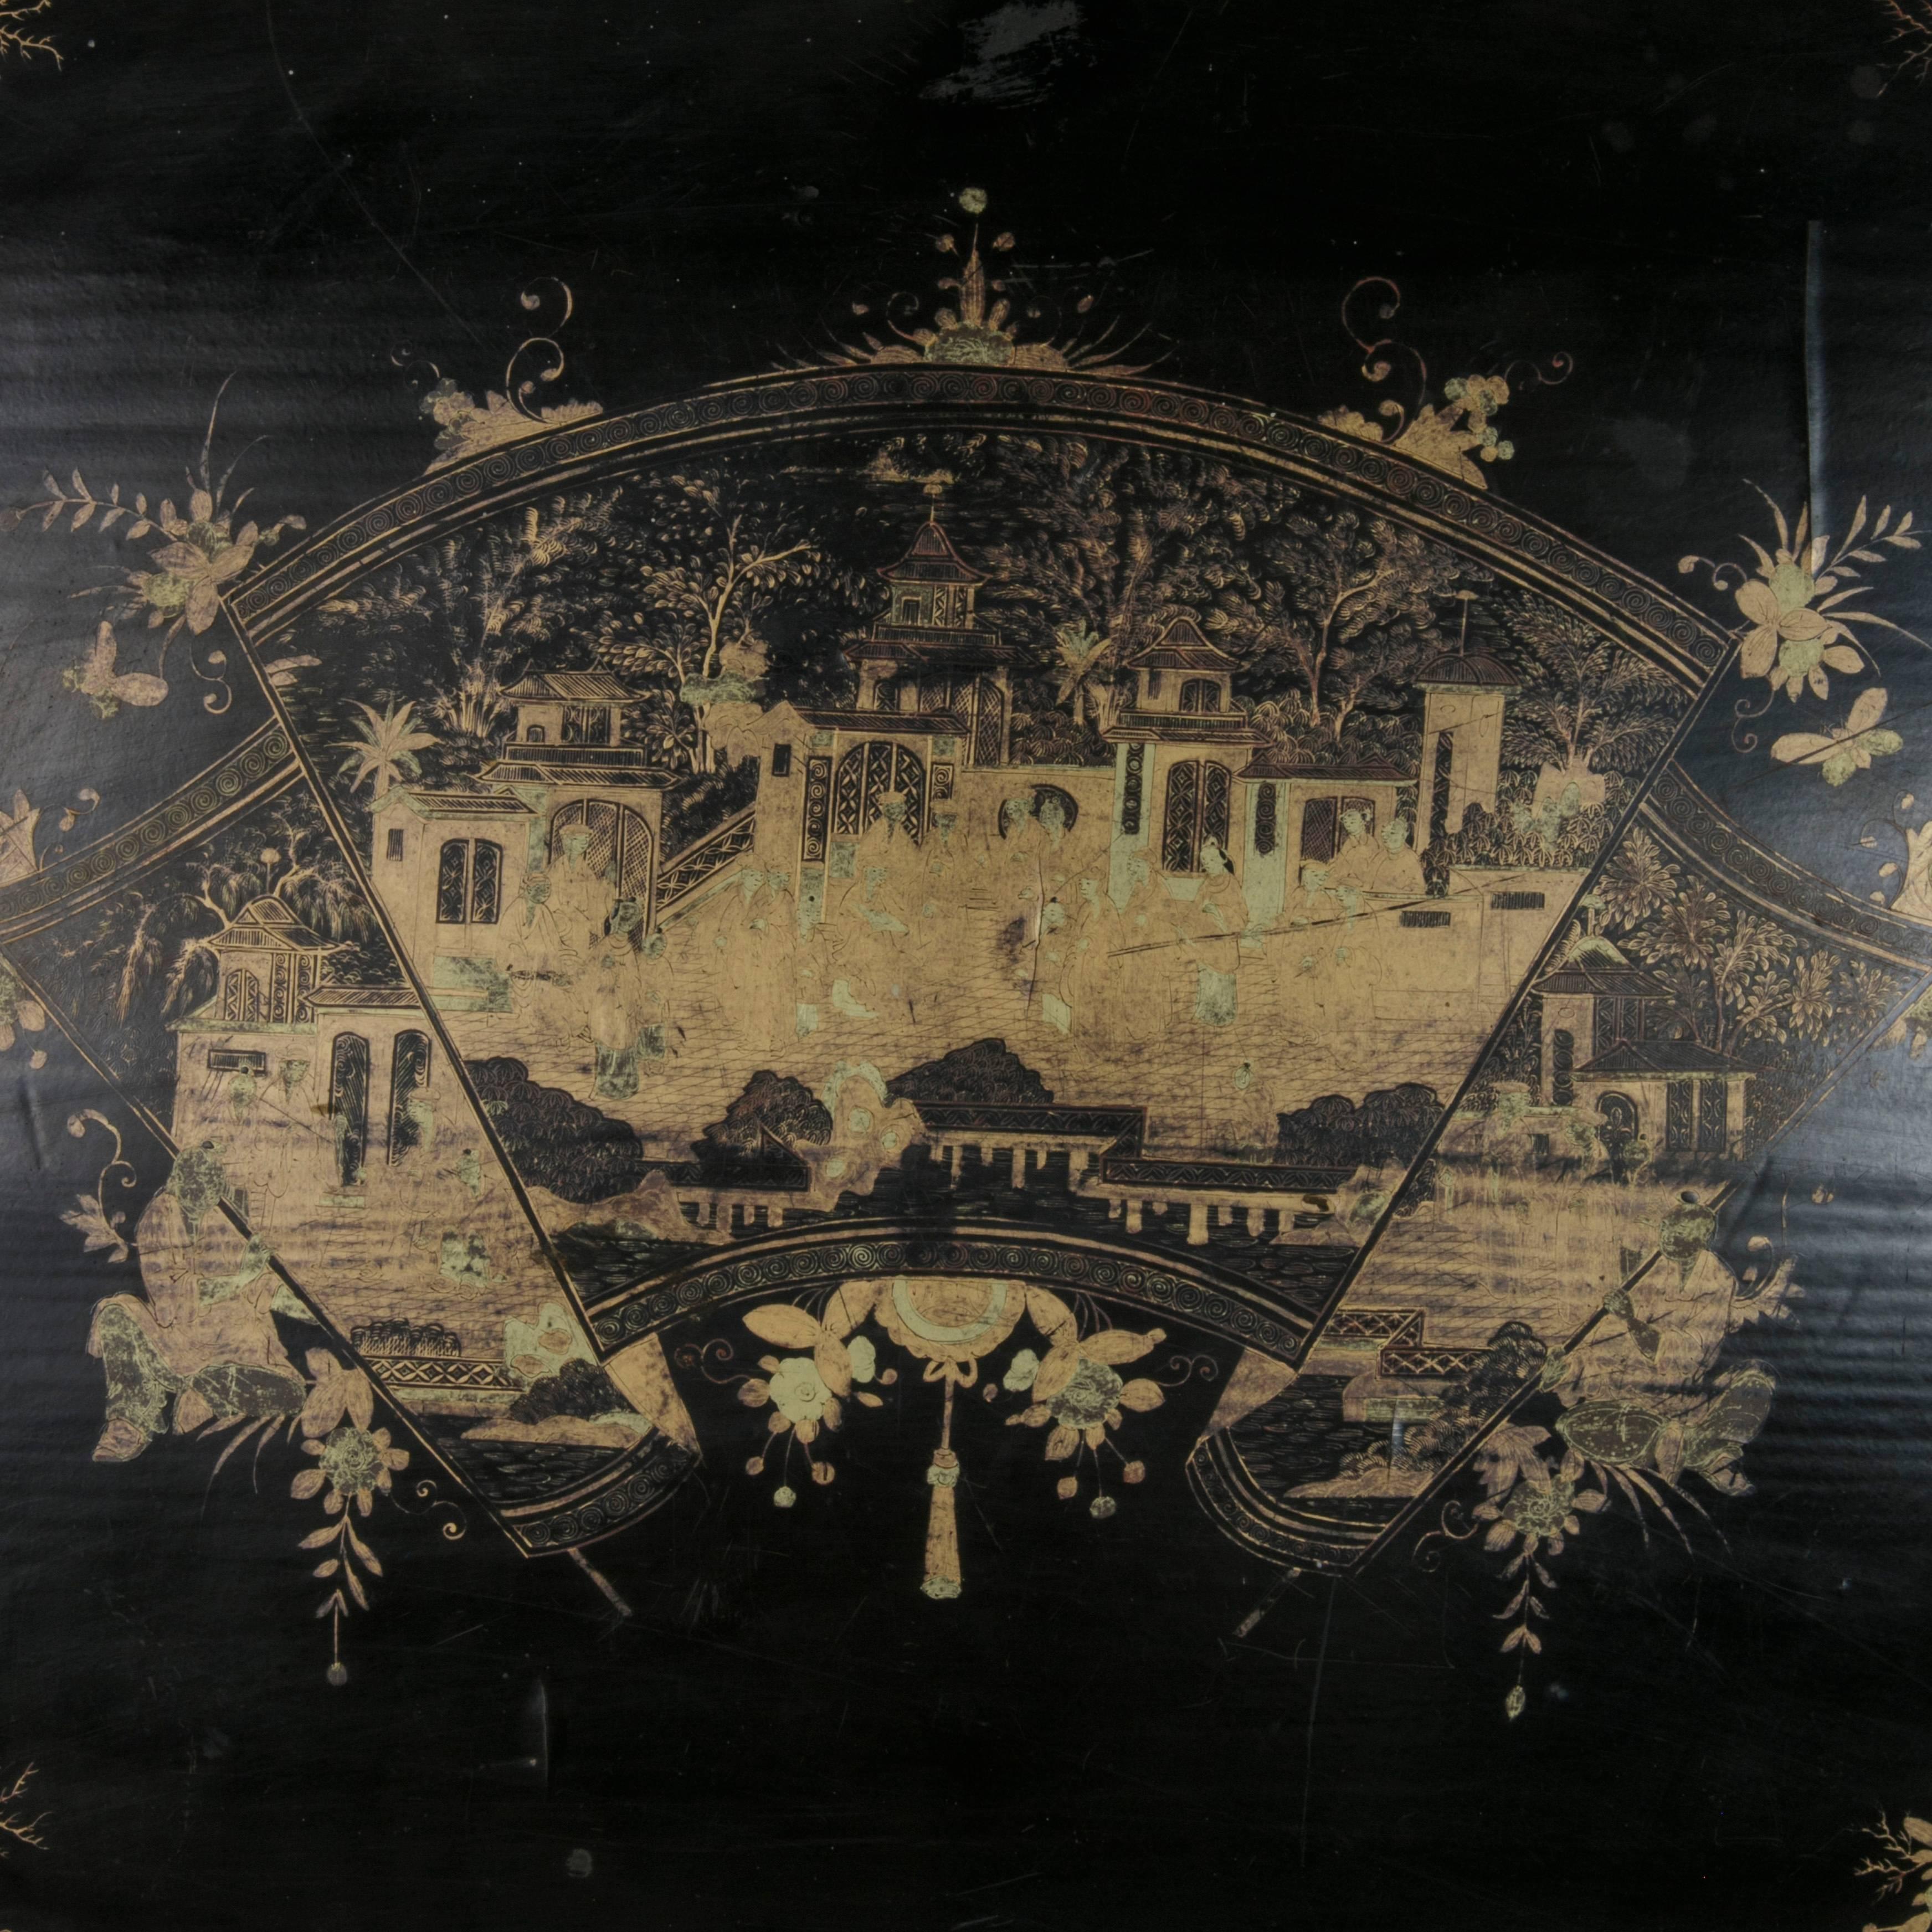 Found in France, this very large 19th century black lacquer wooden tray dates to the period of Napoleon III,  An ornately hand painted scene in gold chinoiserie features a grand procession in front of an imperial palace displayed on an unfurling